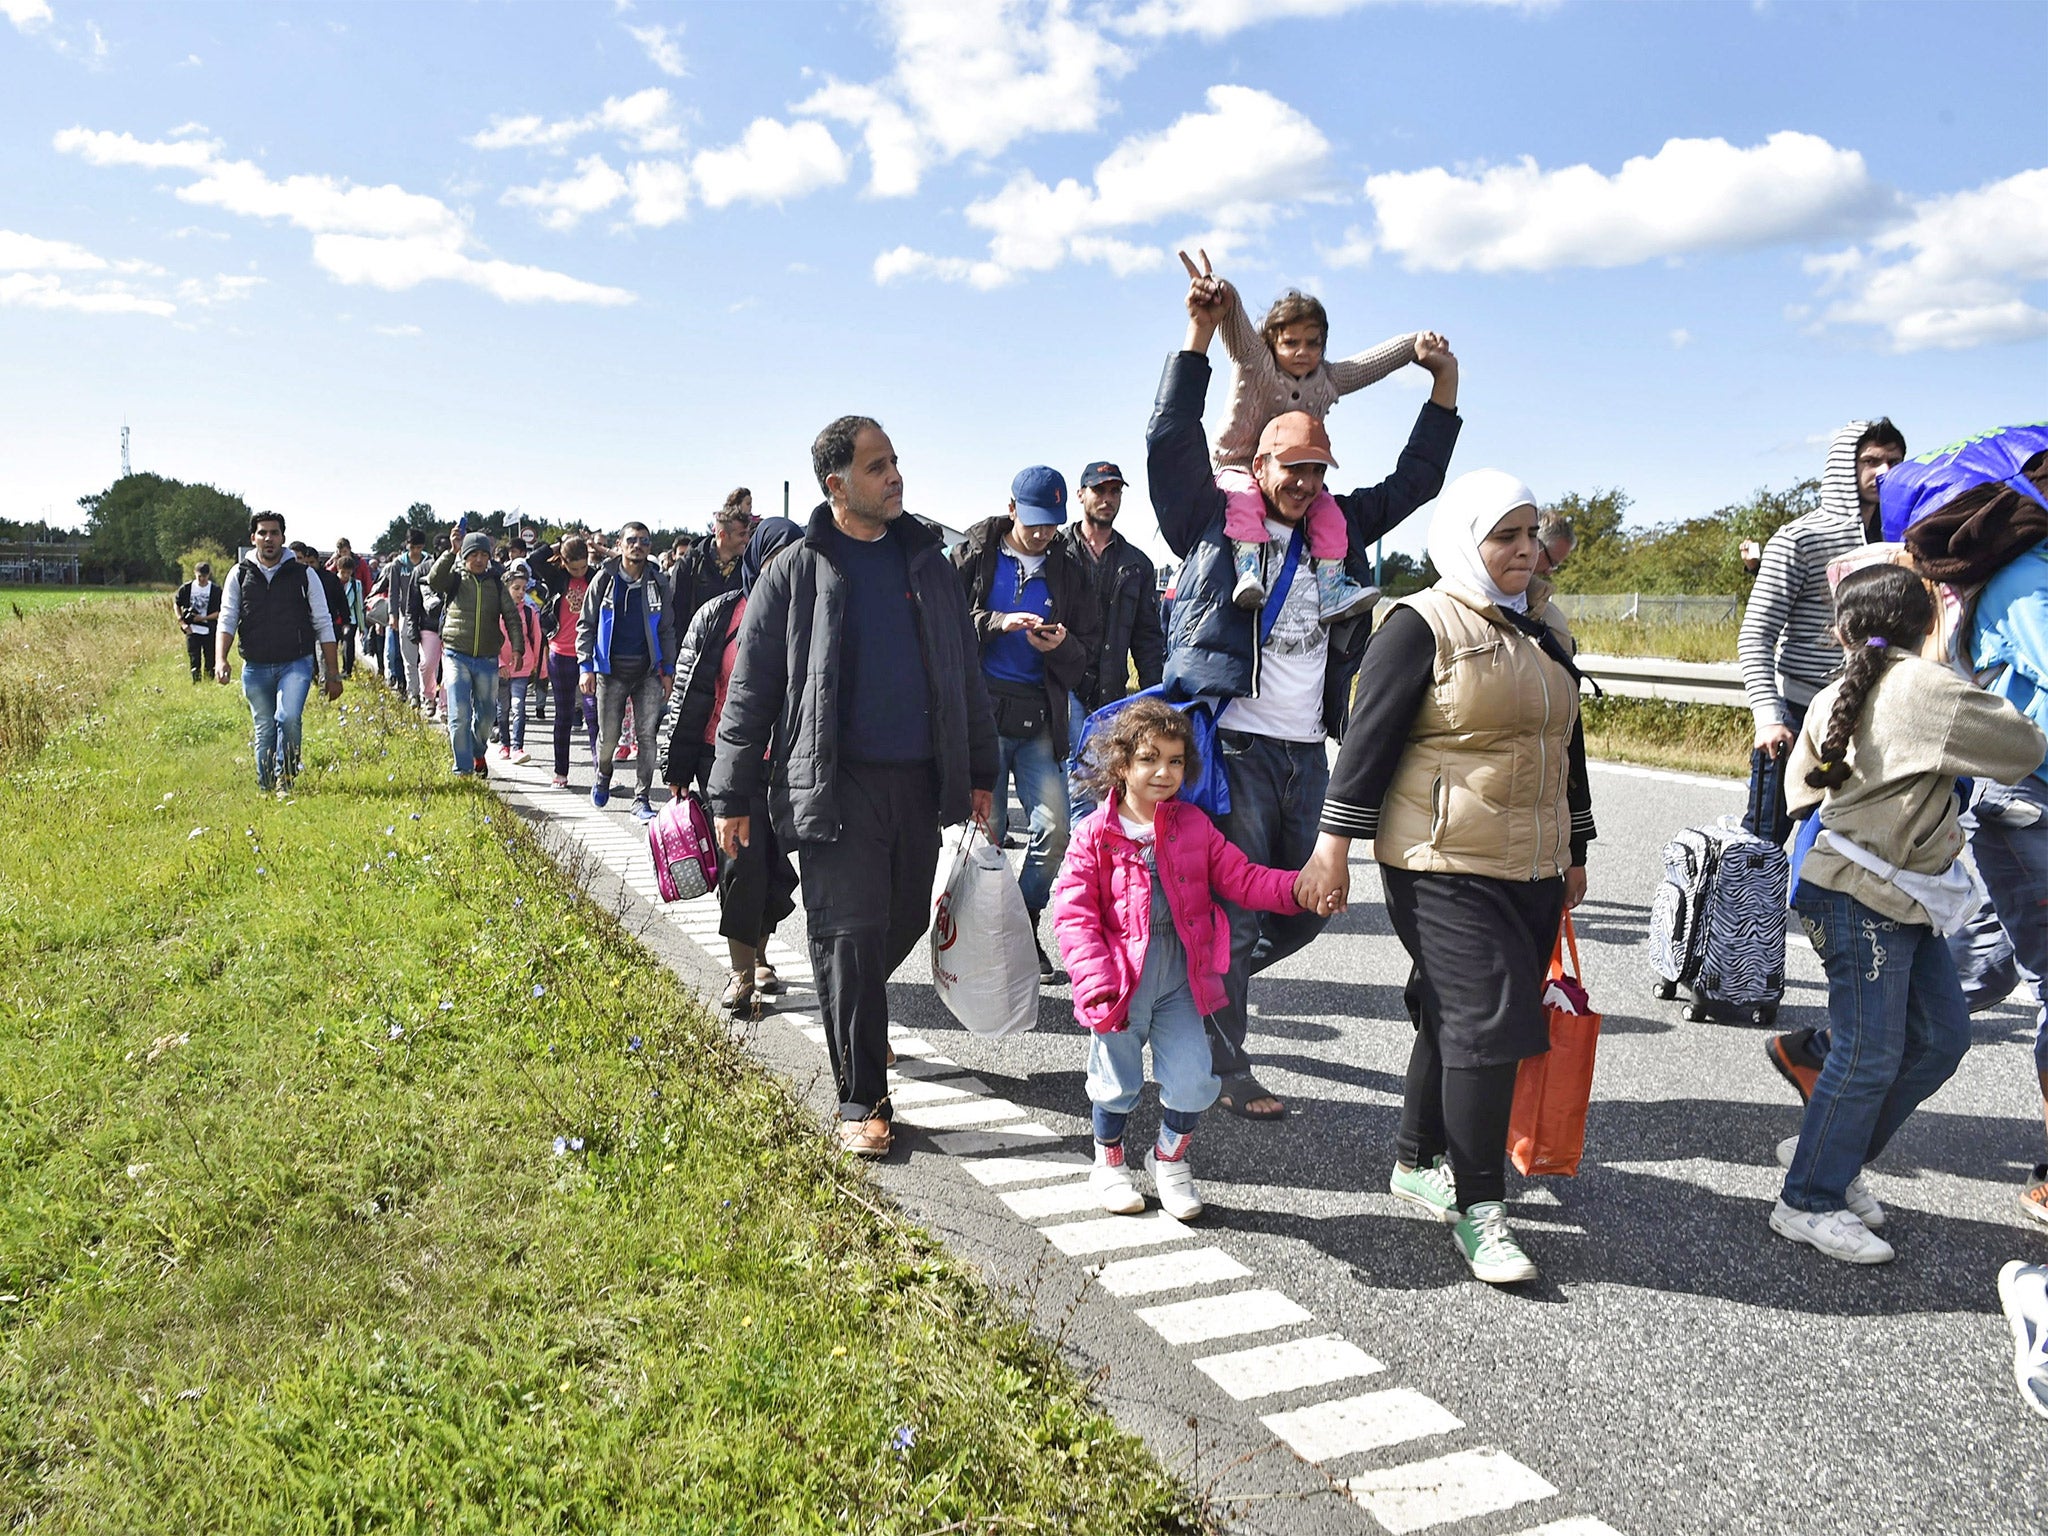 Refugees in Denmark on their way to Sweden